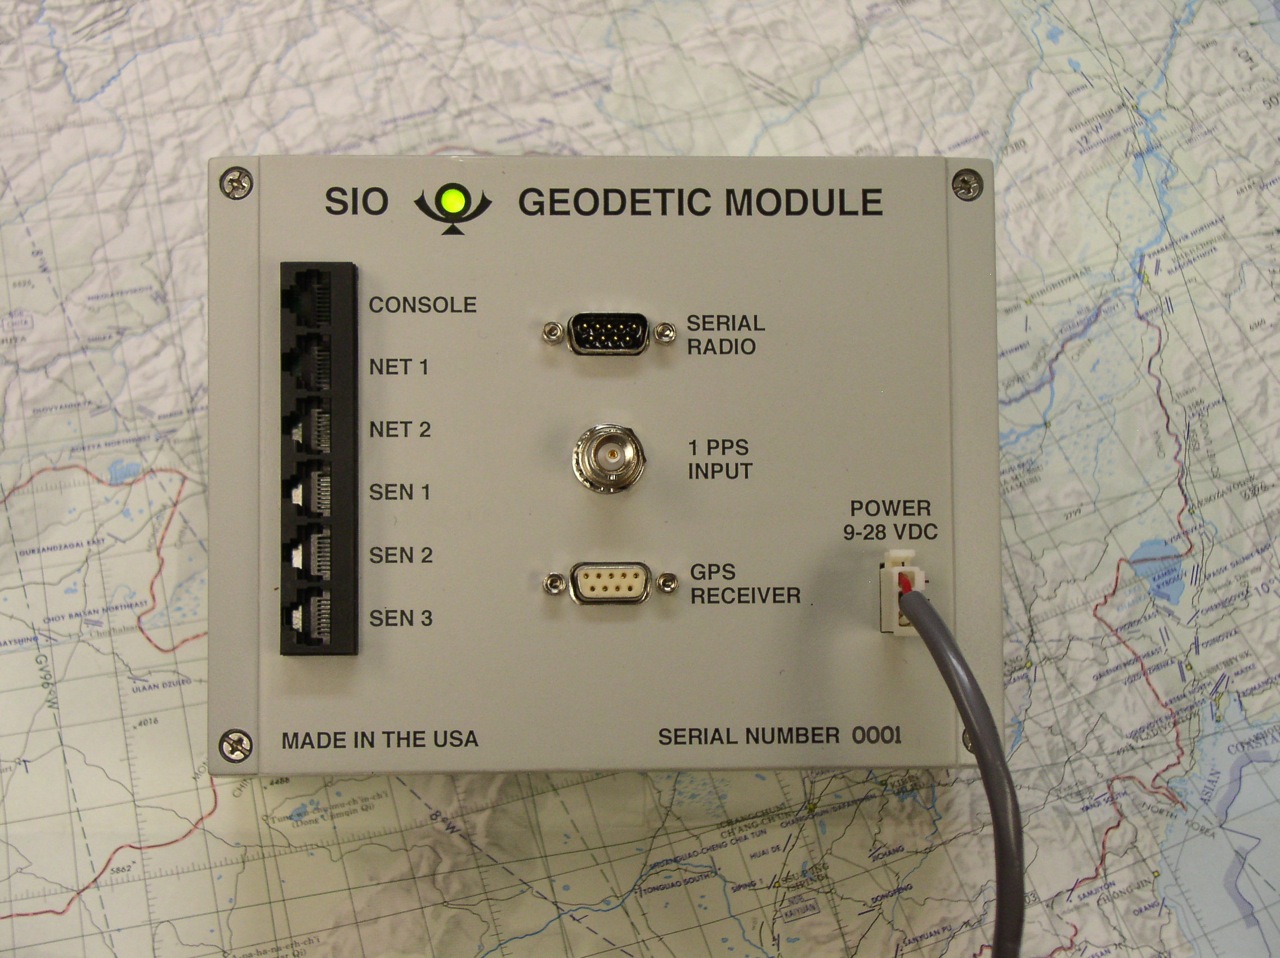 Real-time geodetic modules.